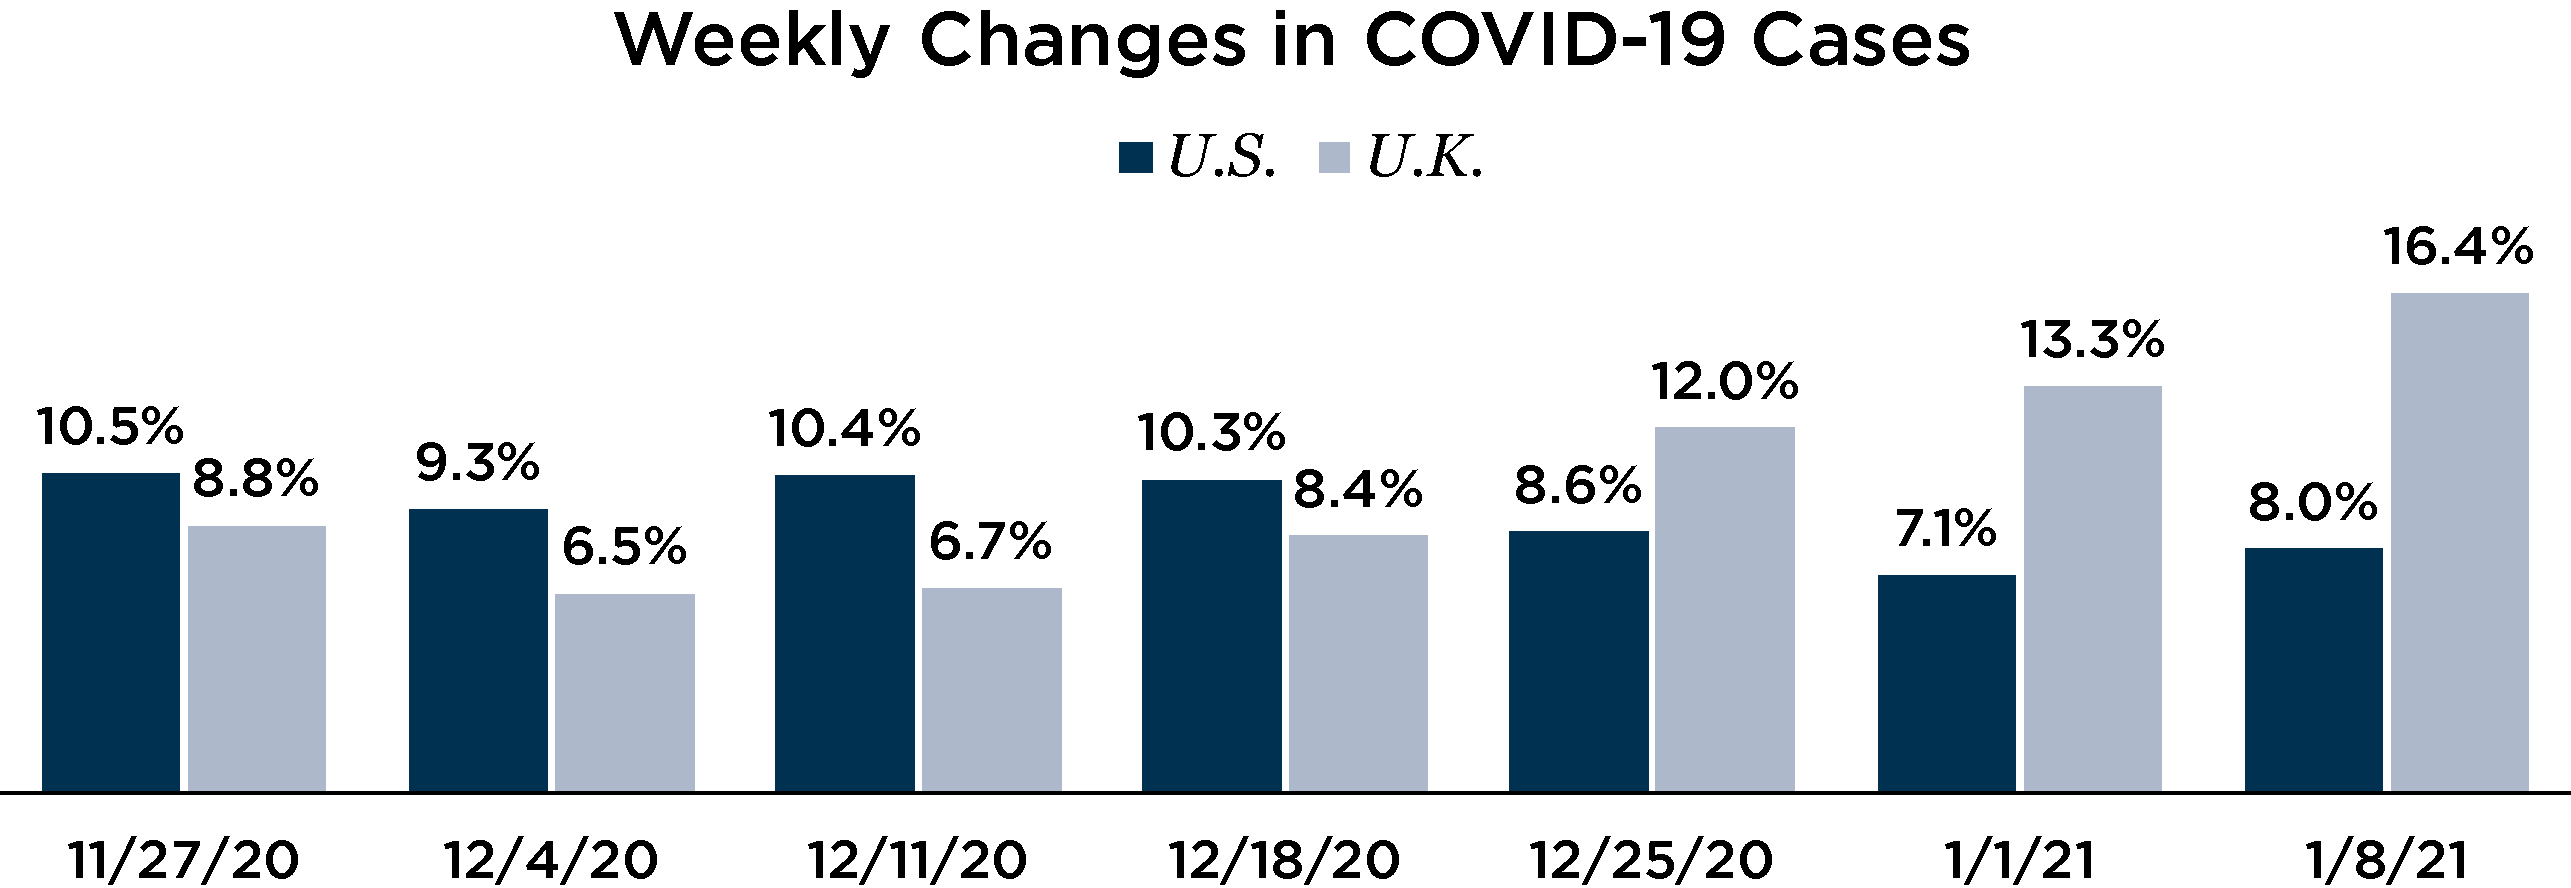 Graph depicting weekly changes in COVID-19 cases